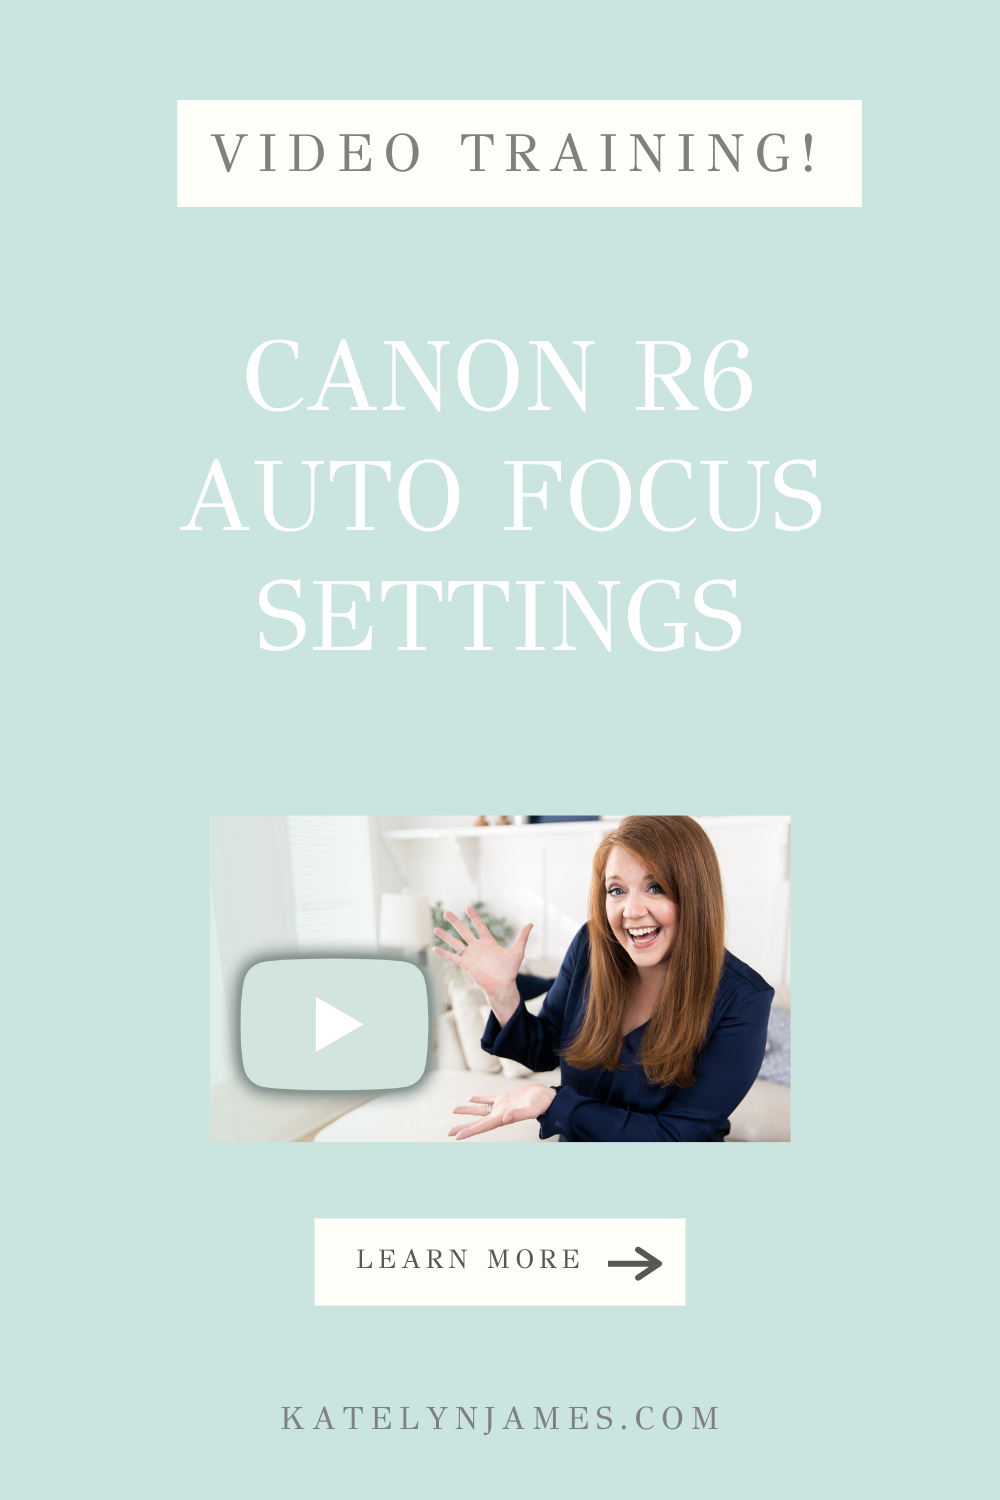 CANON R6 AF SETTINGS